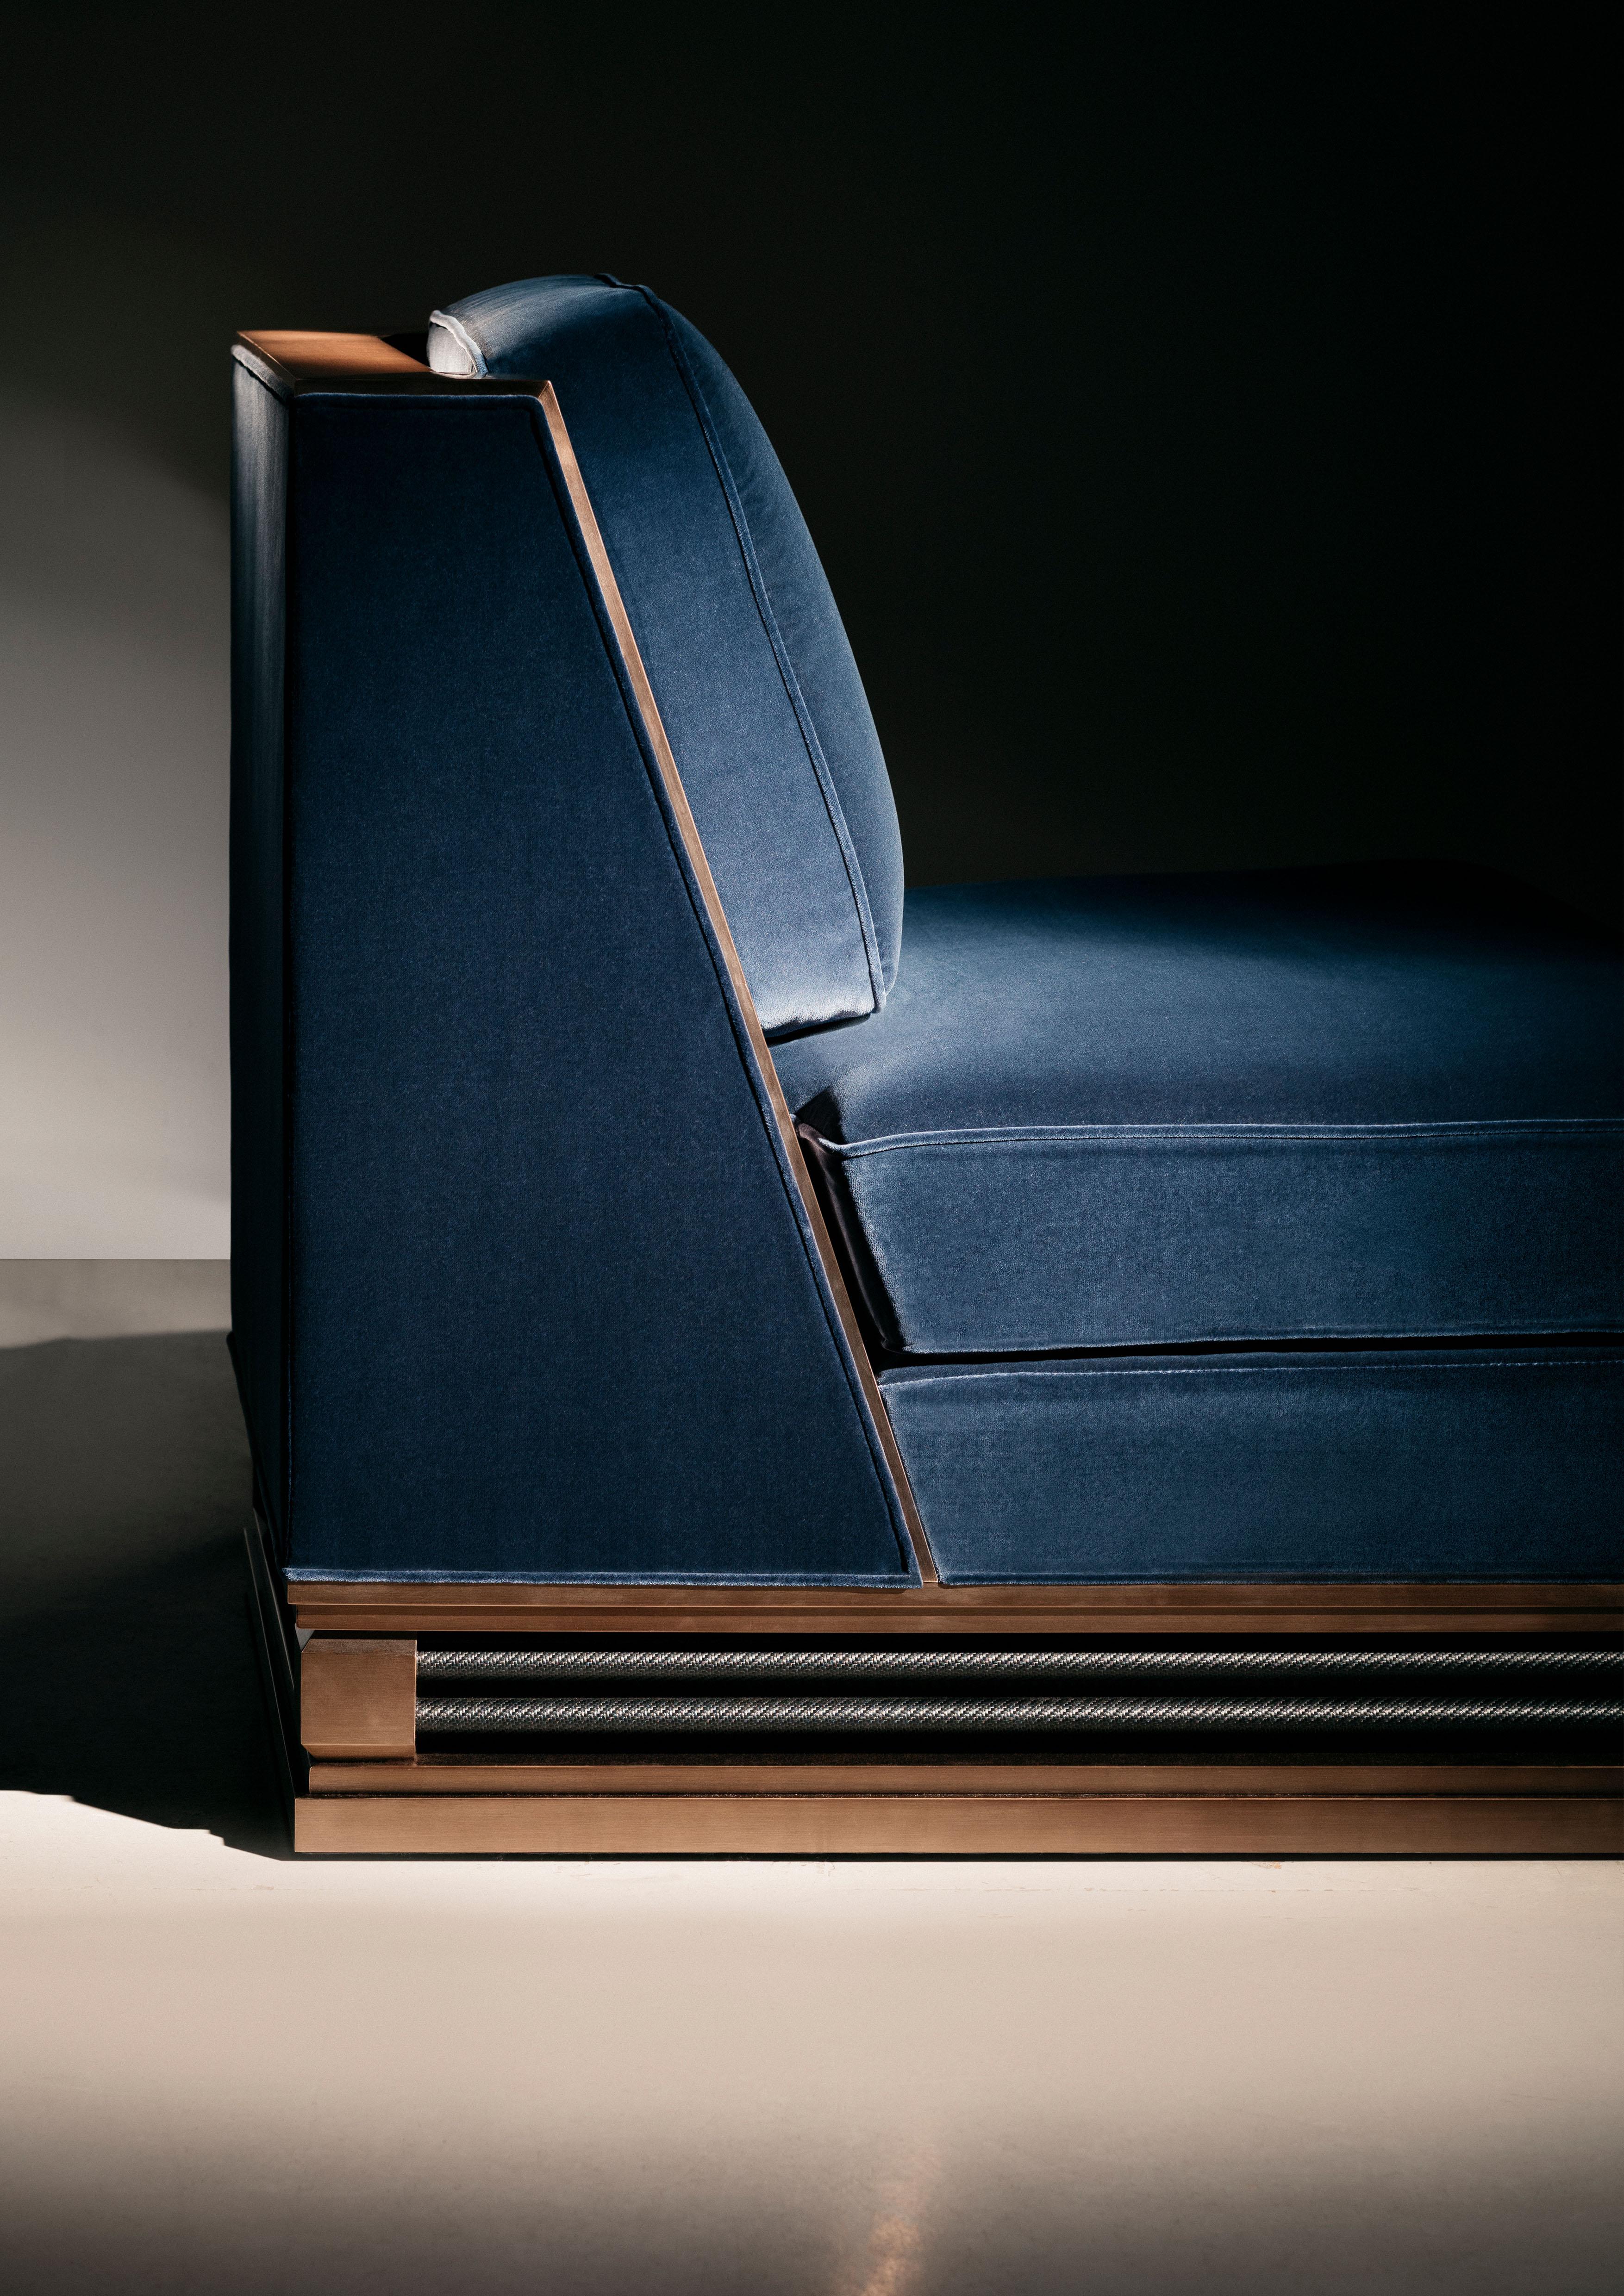 This elegant chair combines the sensuousness of upholstery with the precision of an exposed metal frame. Its angled physique mounted on the tensile tactility of a compact metal base.